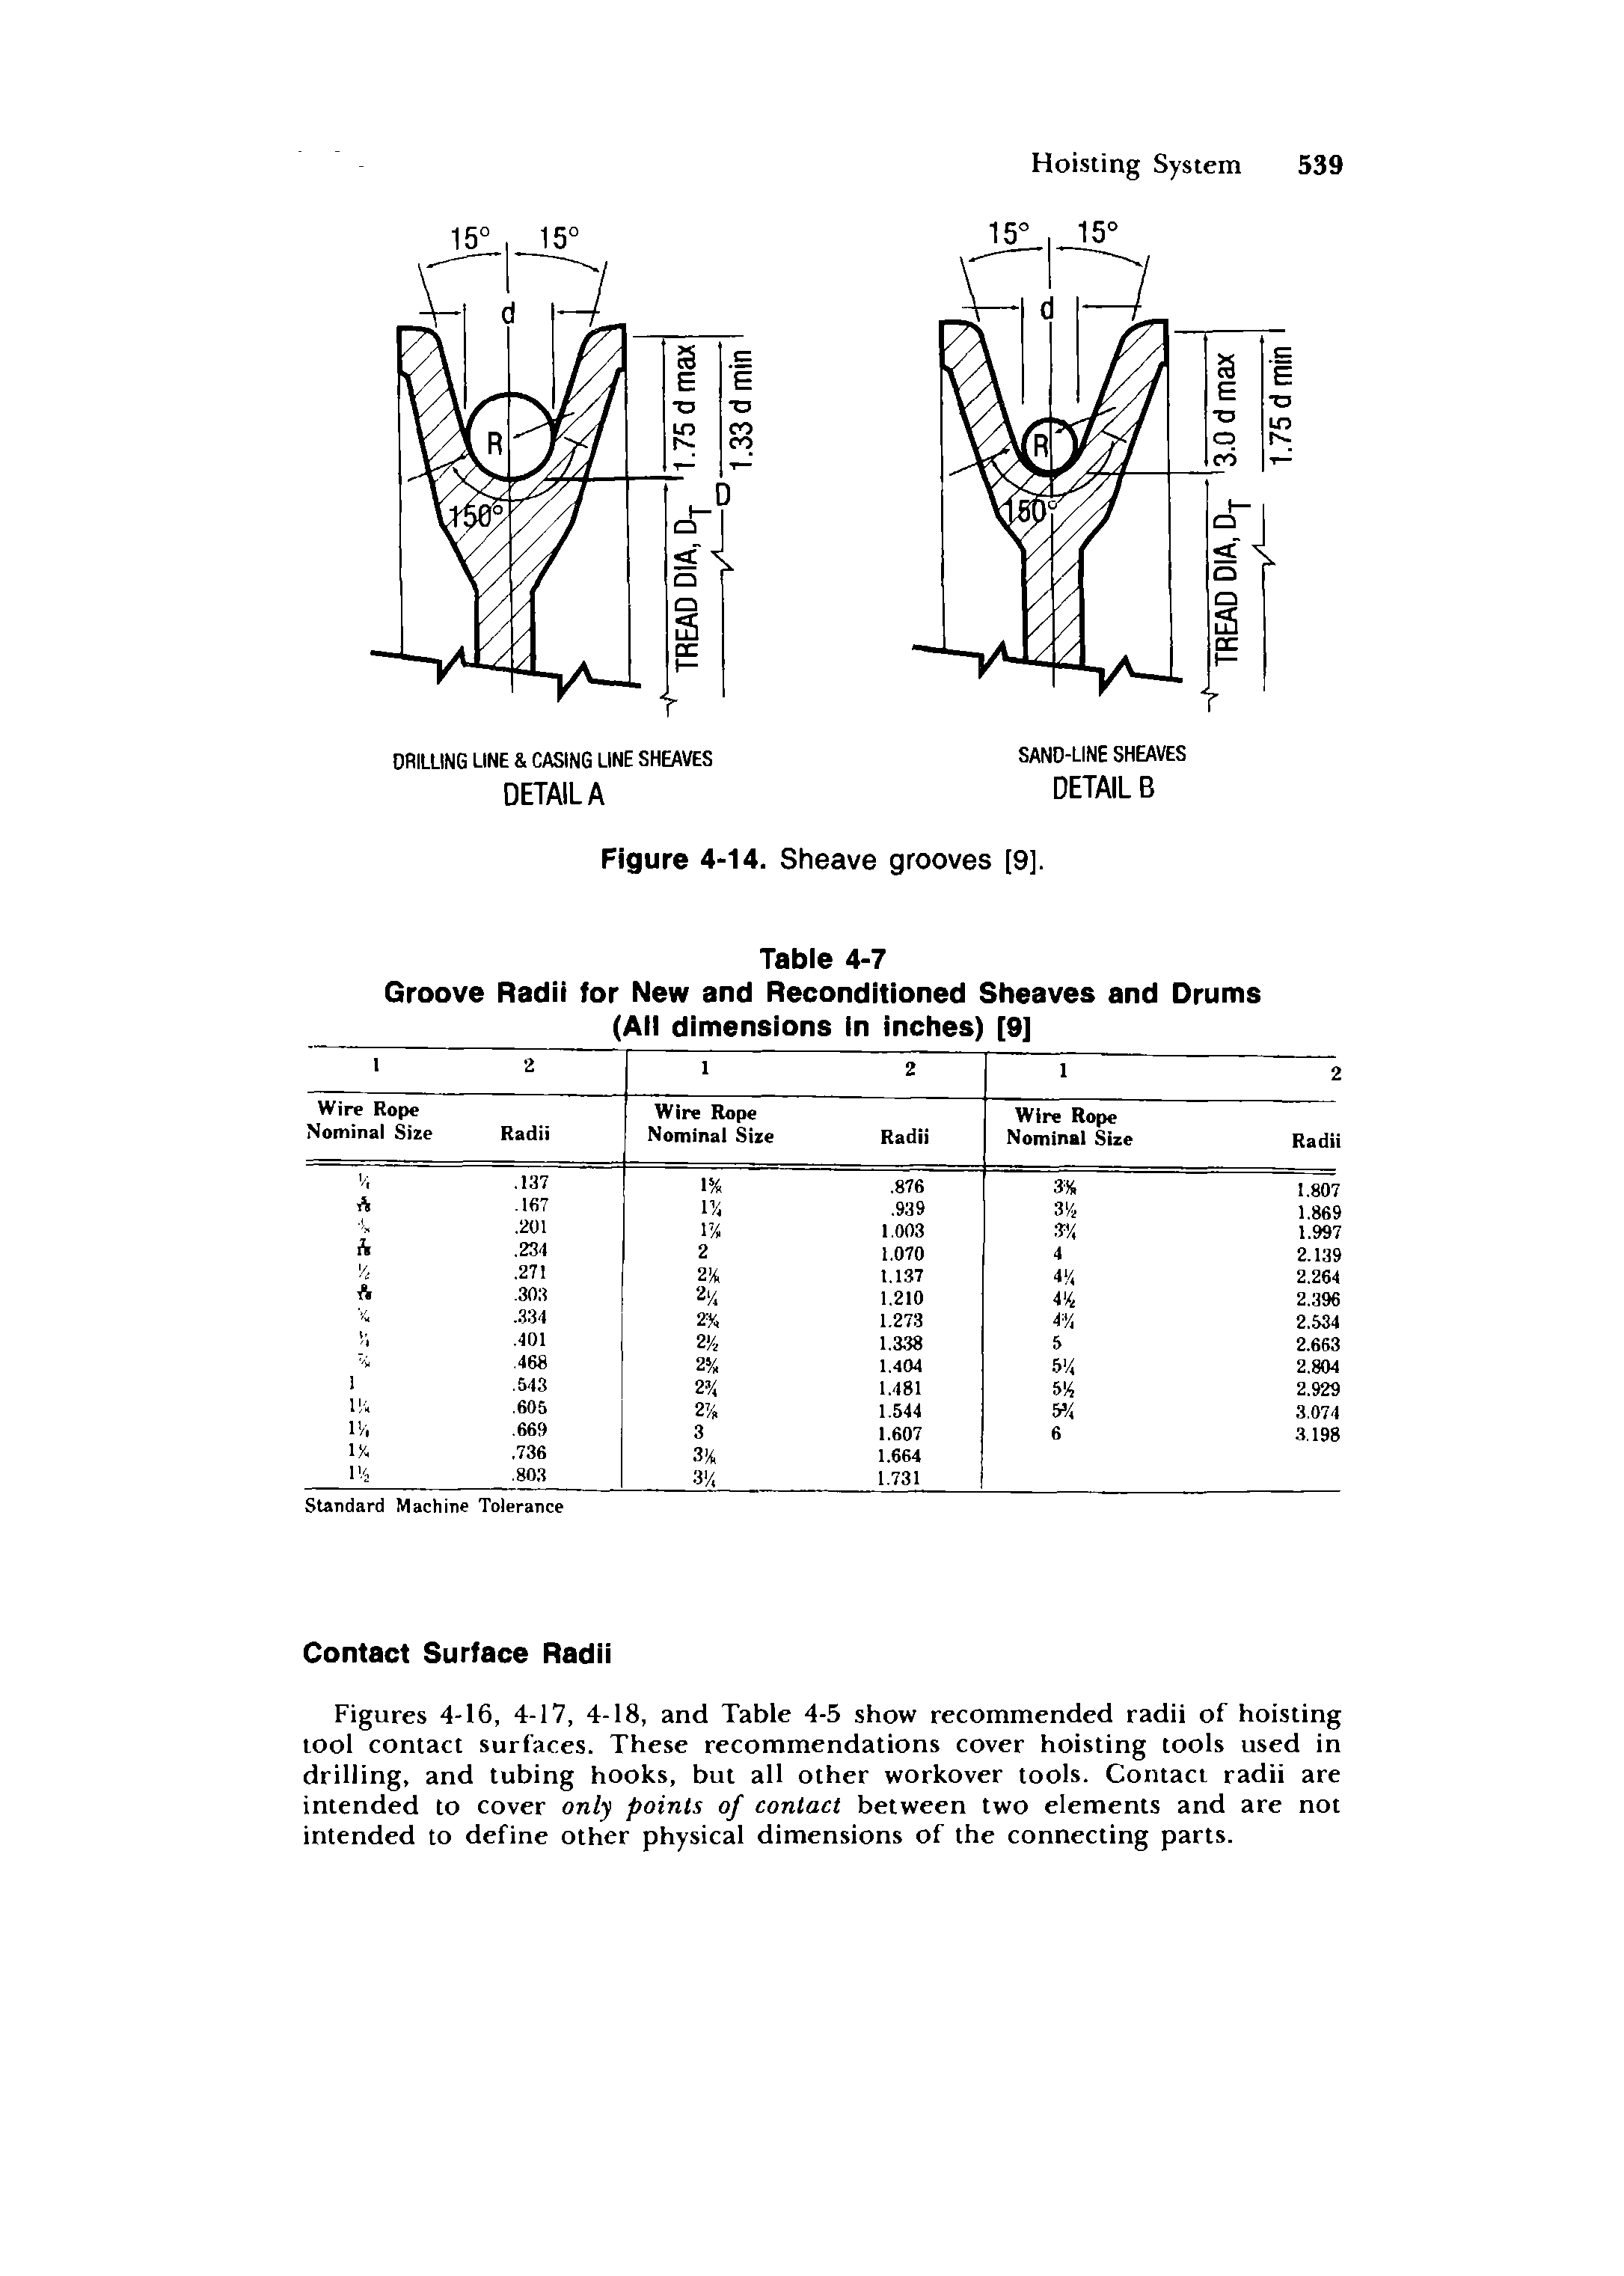 Figures 4-16, 4-17, 4-18, and Table 4-5 show recommended radii of hoisting tool contact surfaces. These recommendations cover hoisting tools used in drilling, and tubing hooks, but all other workover tools. Contact radii are intended to cover only points of contact between two elements and are not intended to define other physical dimensions of the connecting parts.